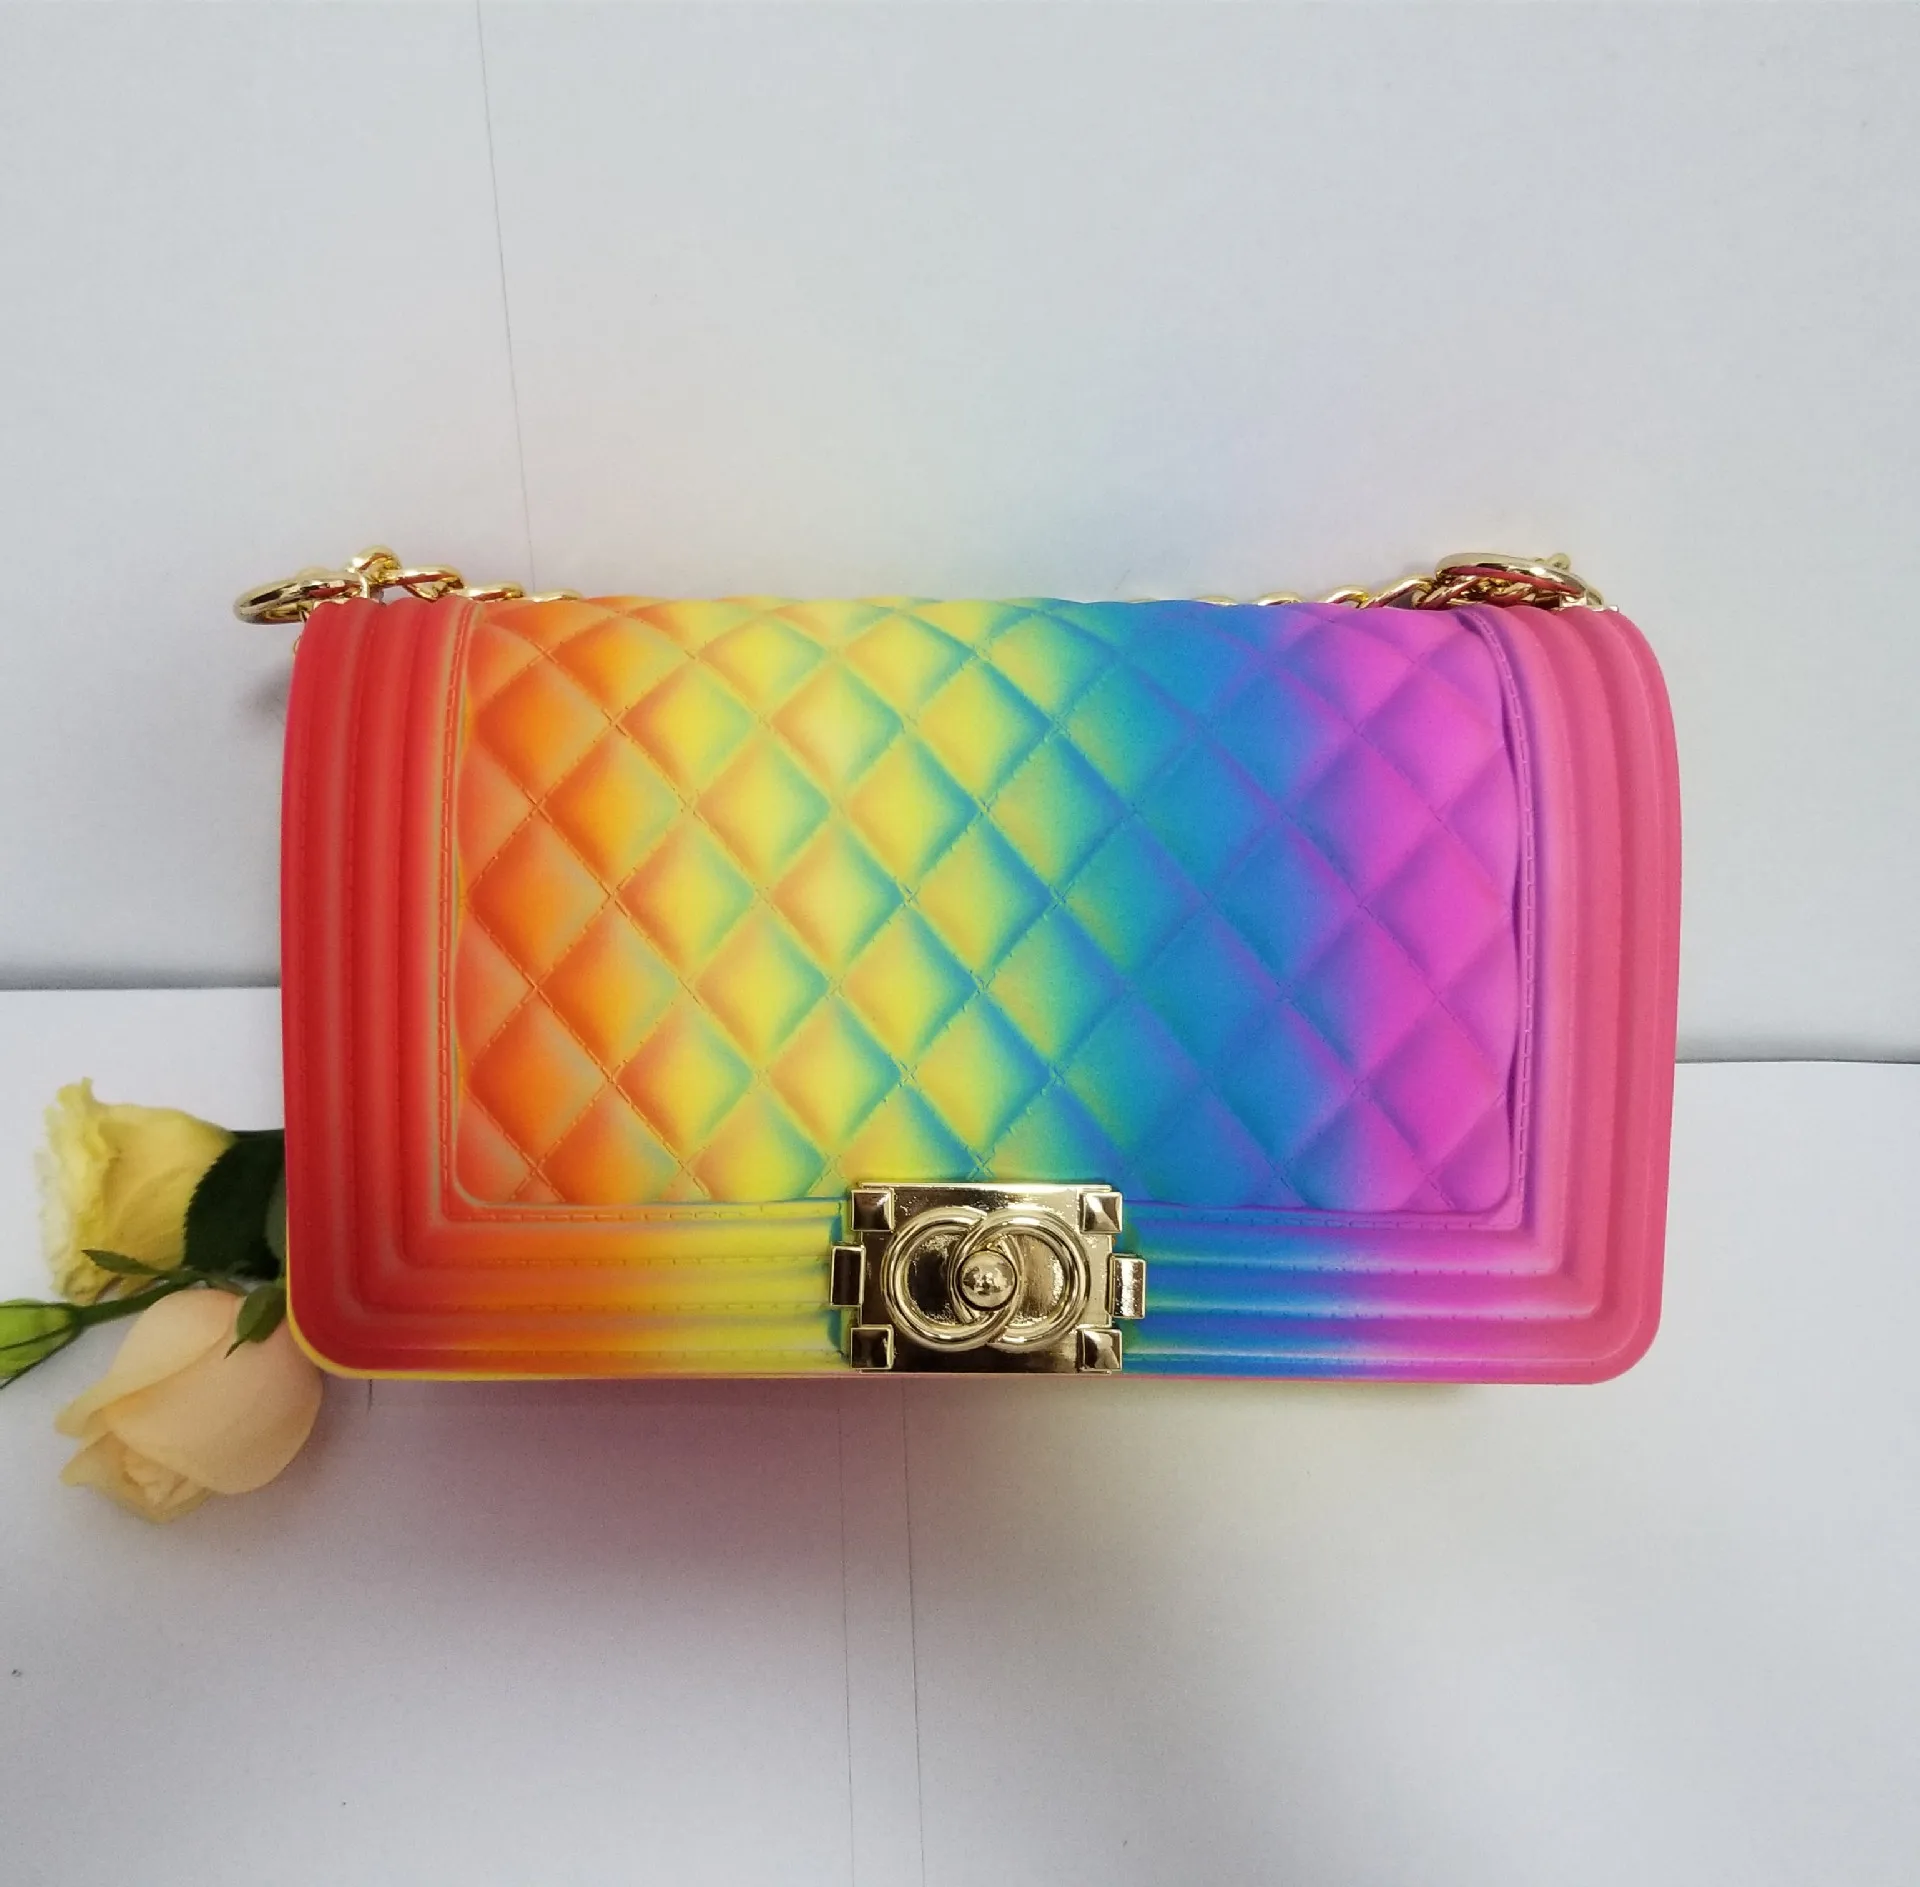 

2021 new arrivals designers Jelly bags wholesale women jelly purse handbags for women ladies purses and handbags, Multicolor